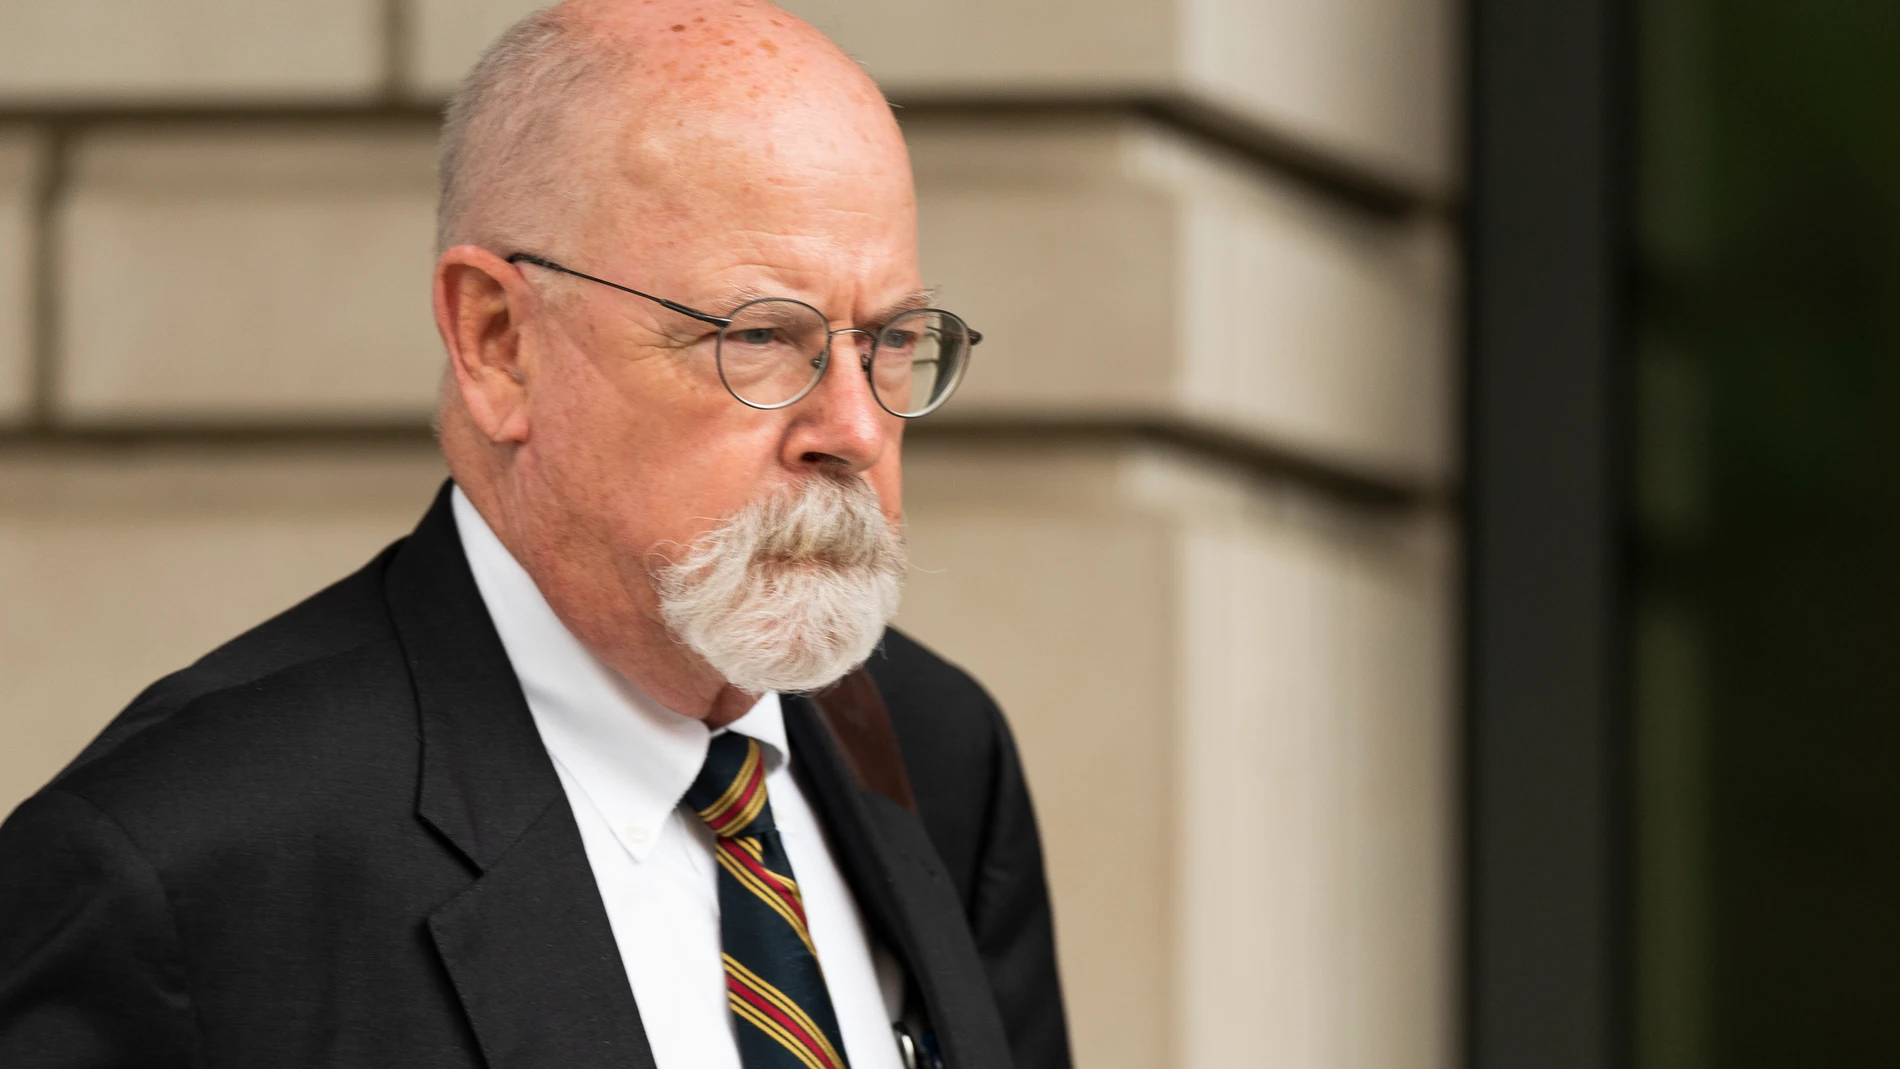 FILE - Special counsel John Durham, the prosecutor appointed to investigate potential government wrongdoing in the early days of the Trump-Russia probe, leaves federal court in Washington, May 16, 2022. Durham ended his four-year investigation into possible FBI misconduct in its probe of ties between Russia and Donald Trump’s 2016 presidential campaign. The report Monday, May 15, 2023, from Durham offers withering criticism of the bureau but a meager court record that fell far short of the former president’s prediction he would uncover the “crime of the century.” (AP Photo/Manuel Balce Ceneta, File)